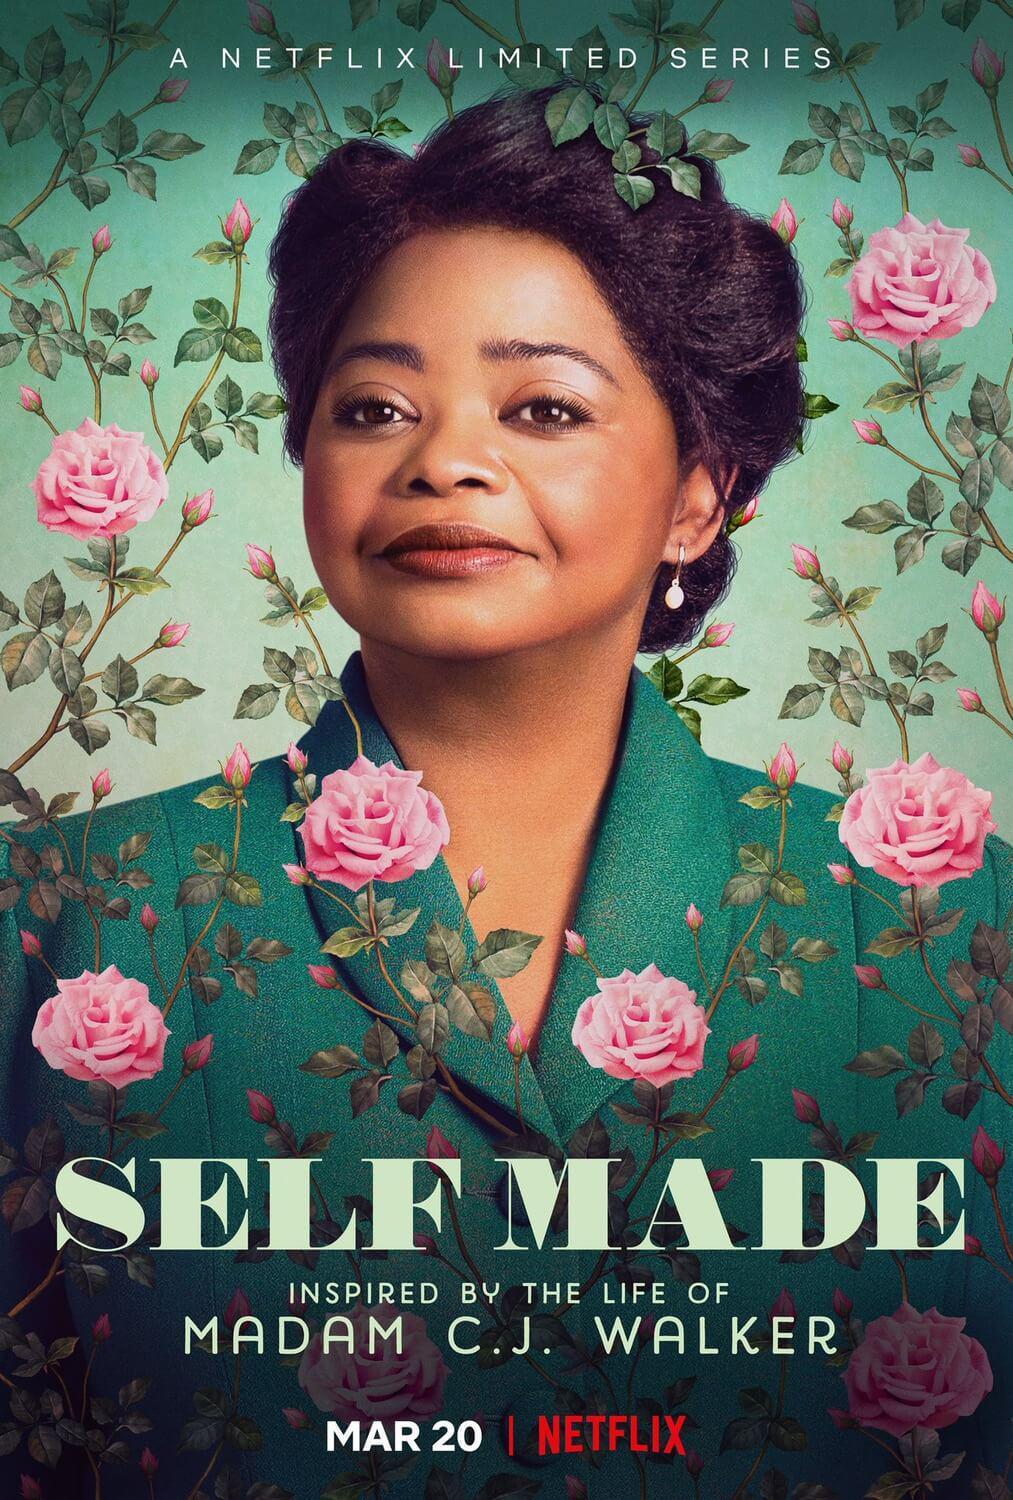 TV ratings for Self Made: Inspired By The Life Of Madam C.J. Walker in Suecia. Netflix TV series